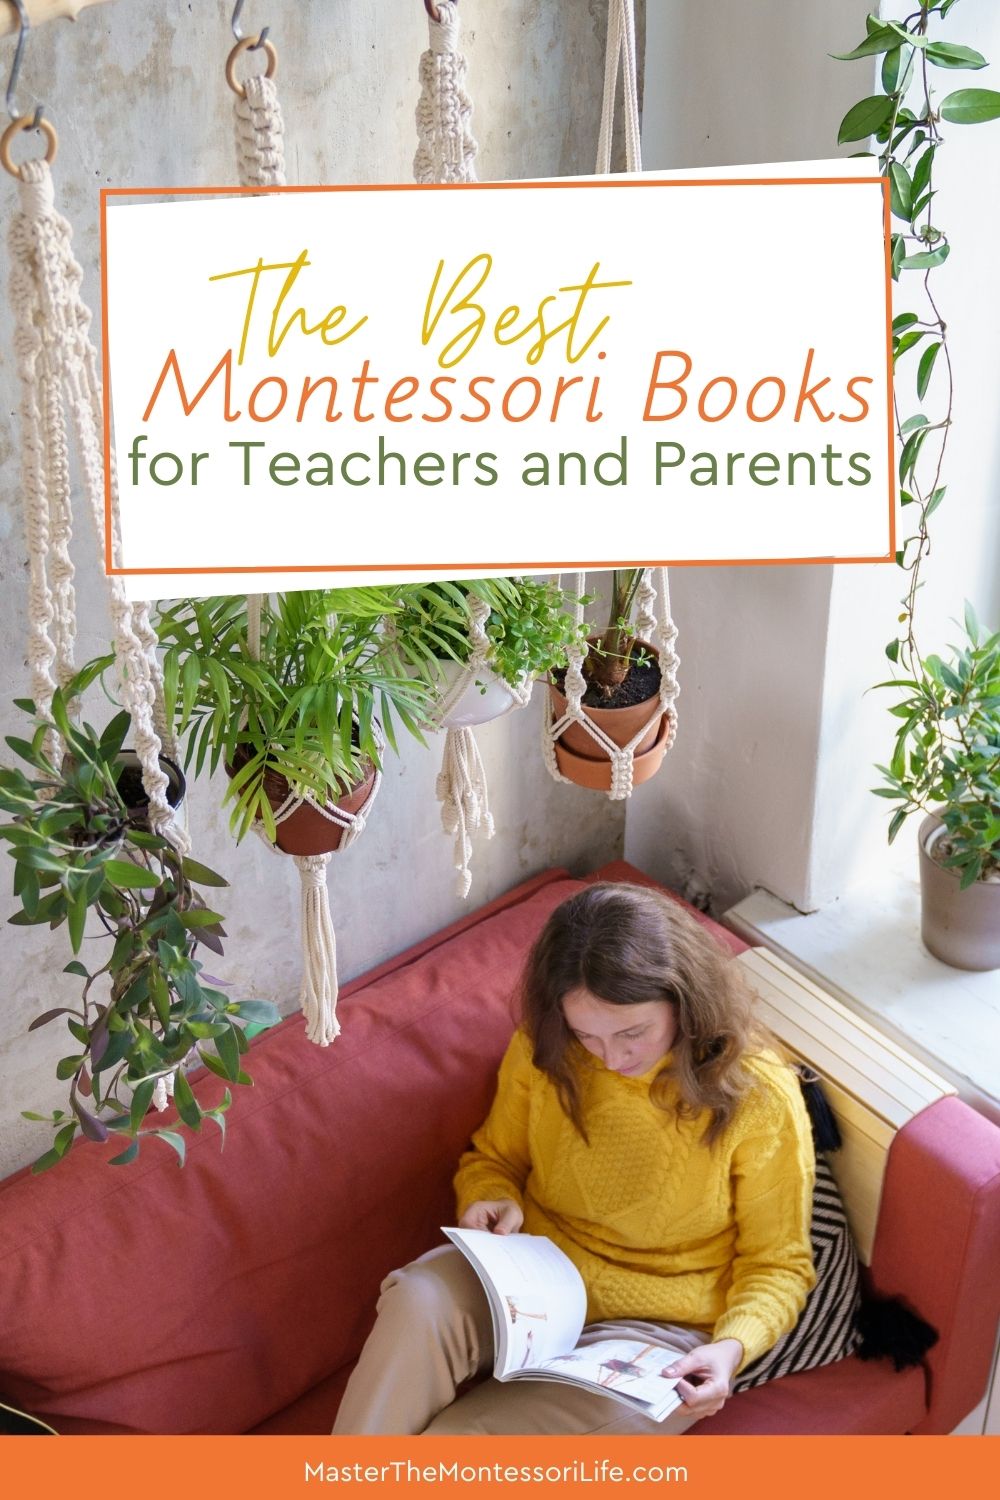 The Best Montessori Books for Teachers and Parents